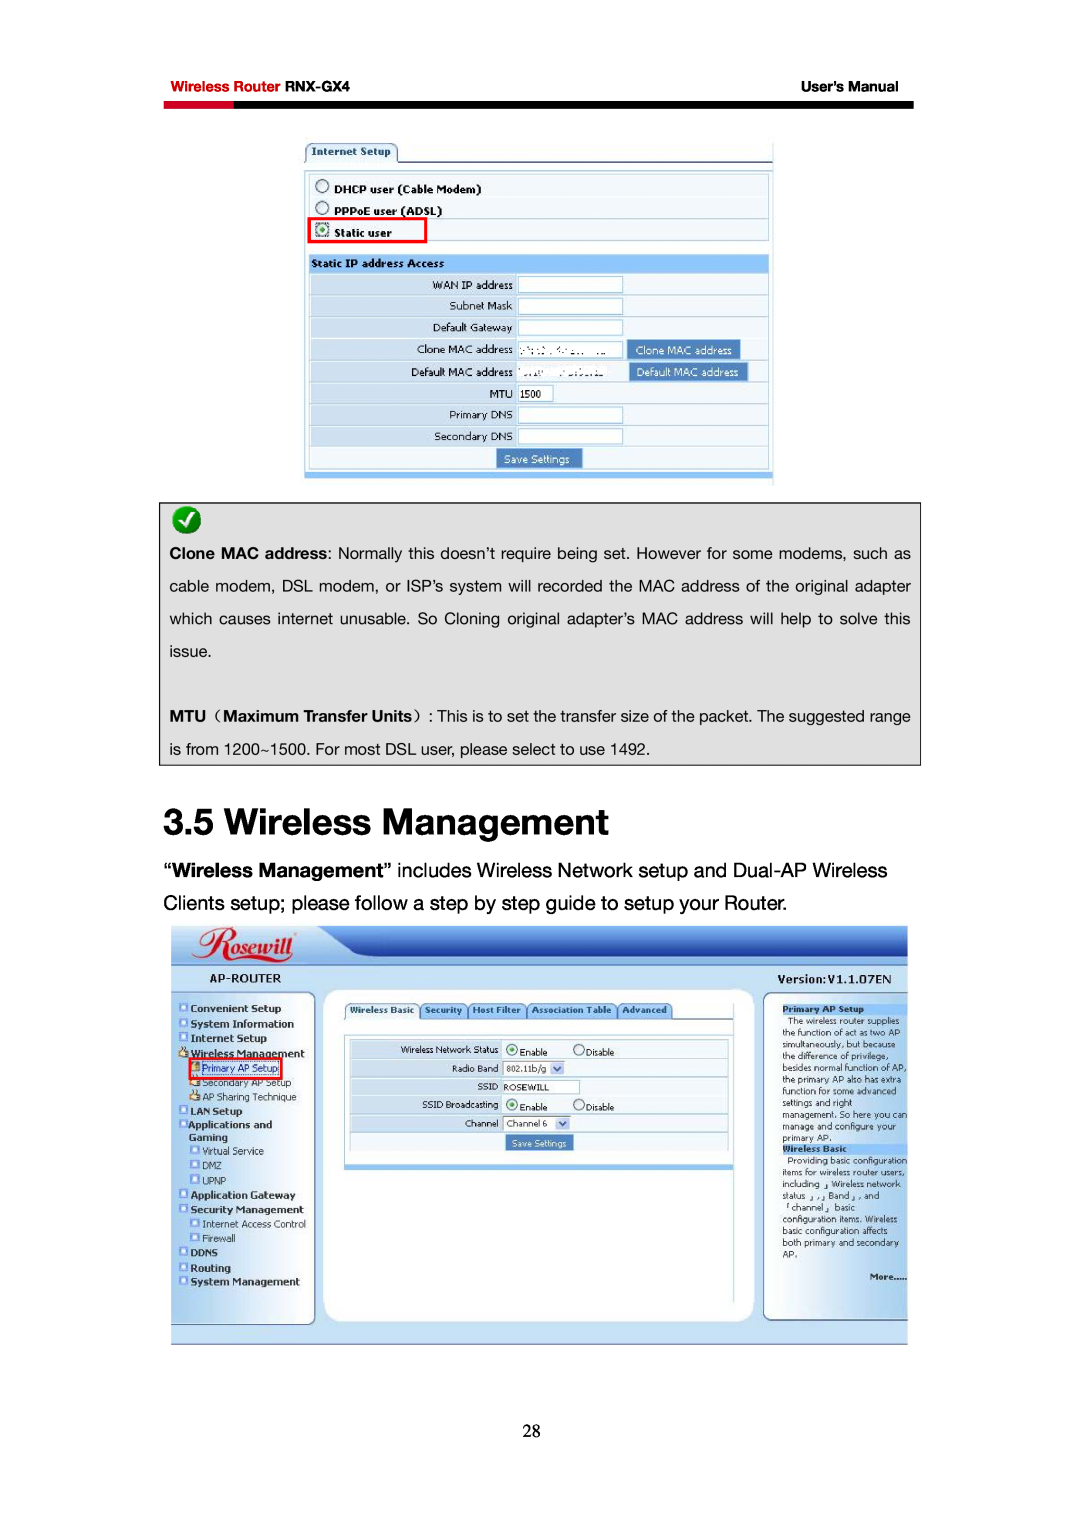 Rosewill RNX-GX4 user manual Wireless Management, Clients setup please follow a step by step guide to setup your Router 